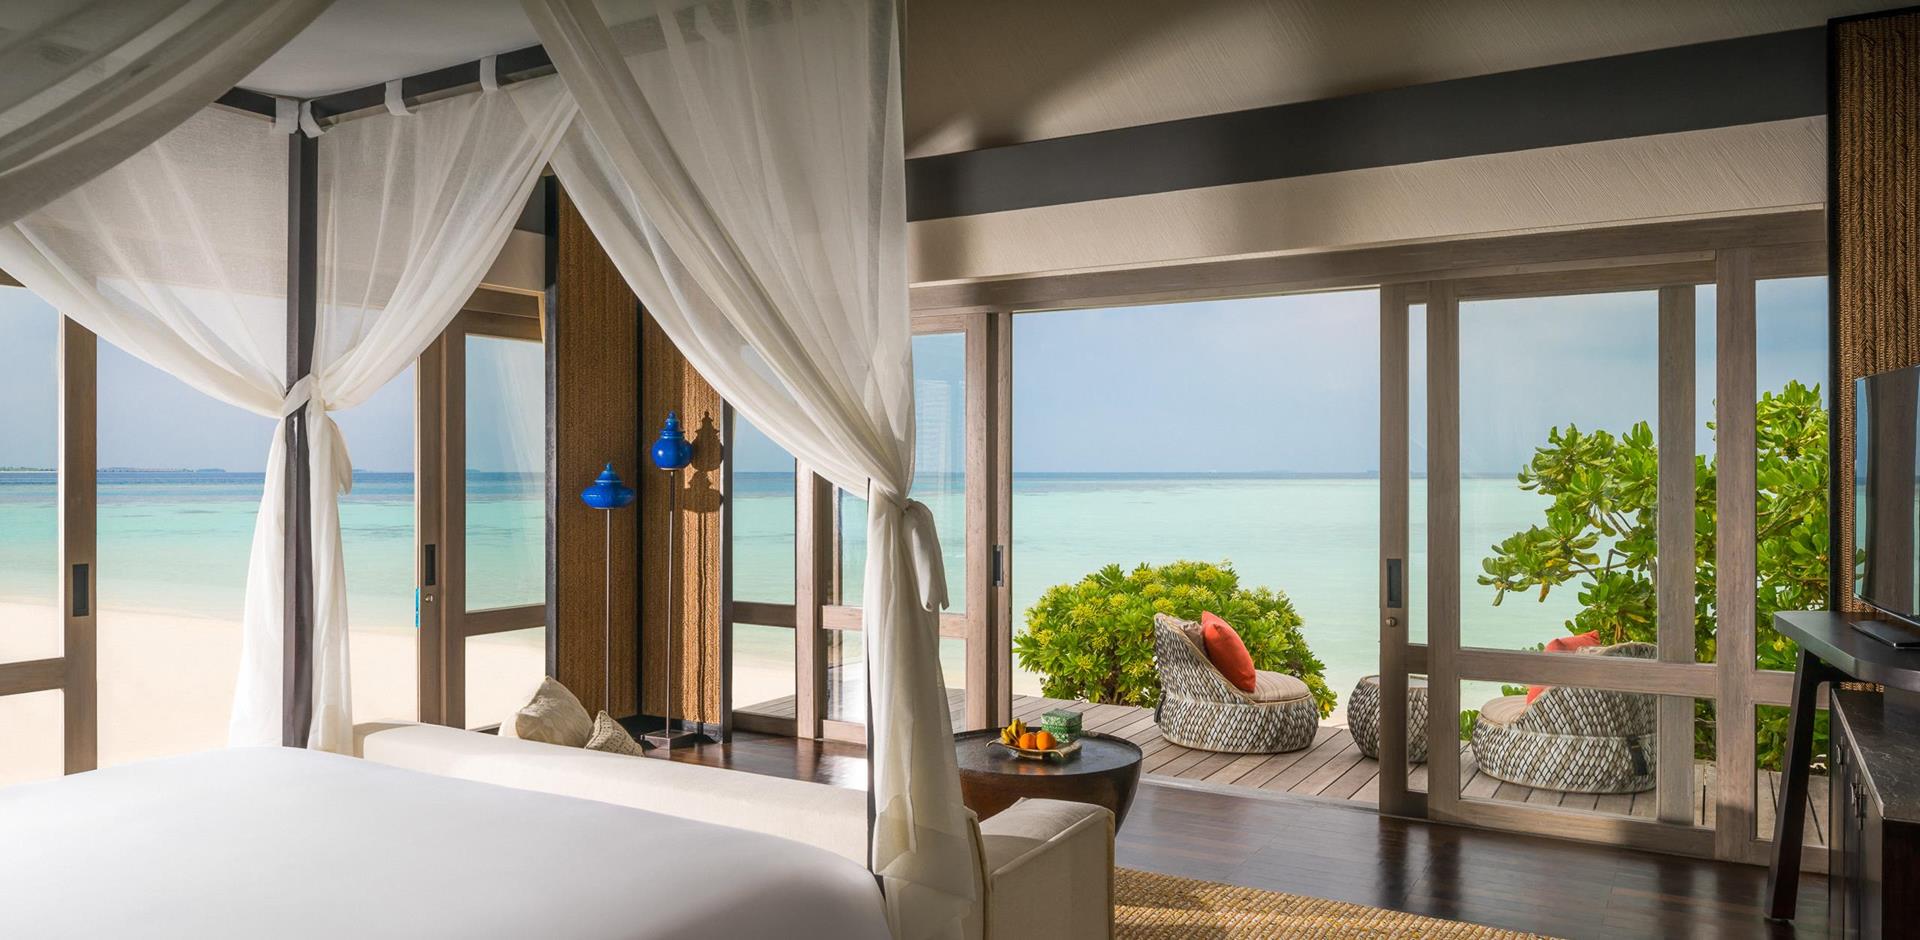 Four Seasons Voavah Private Island room